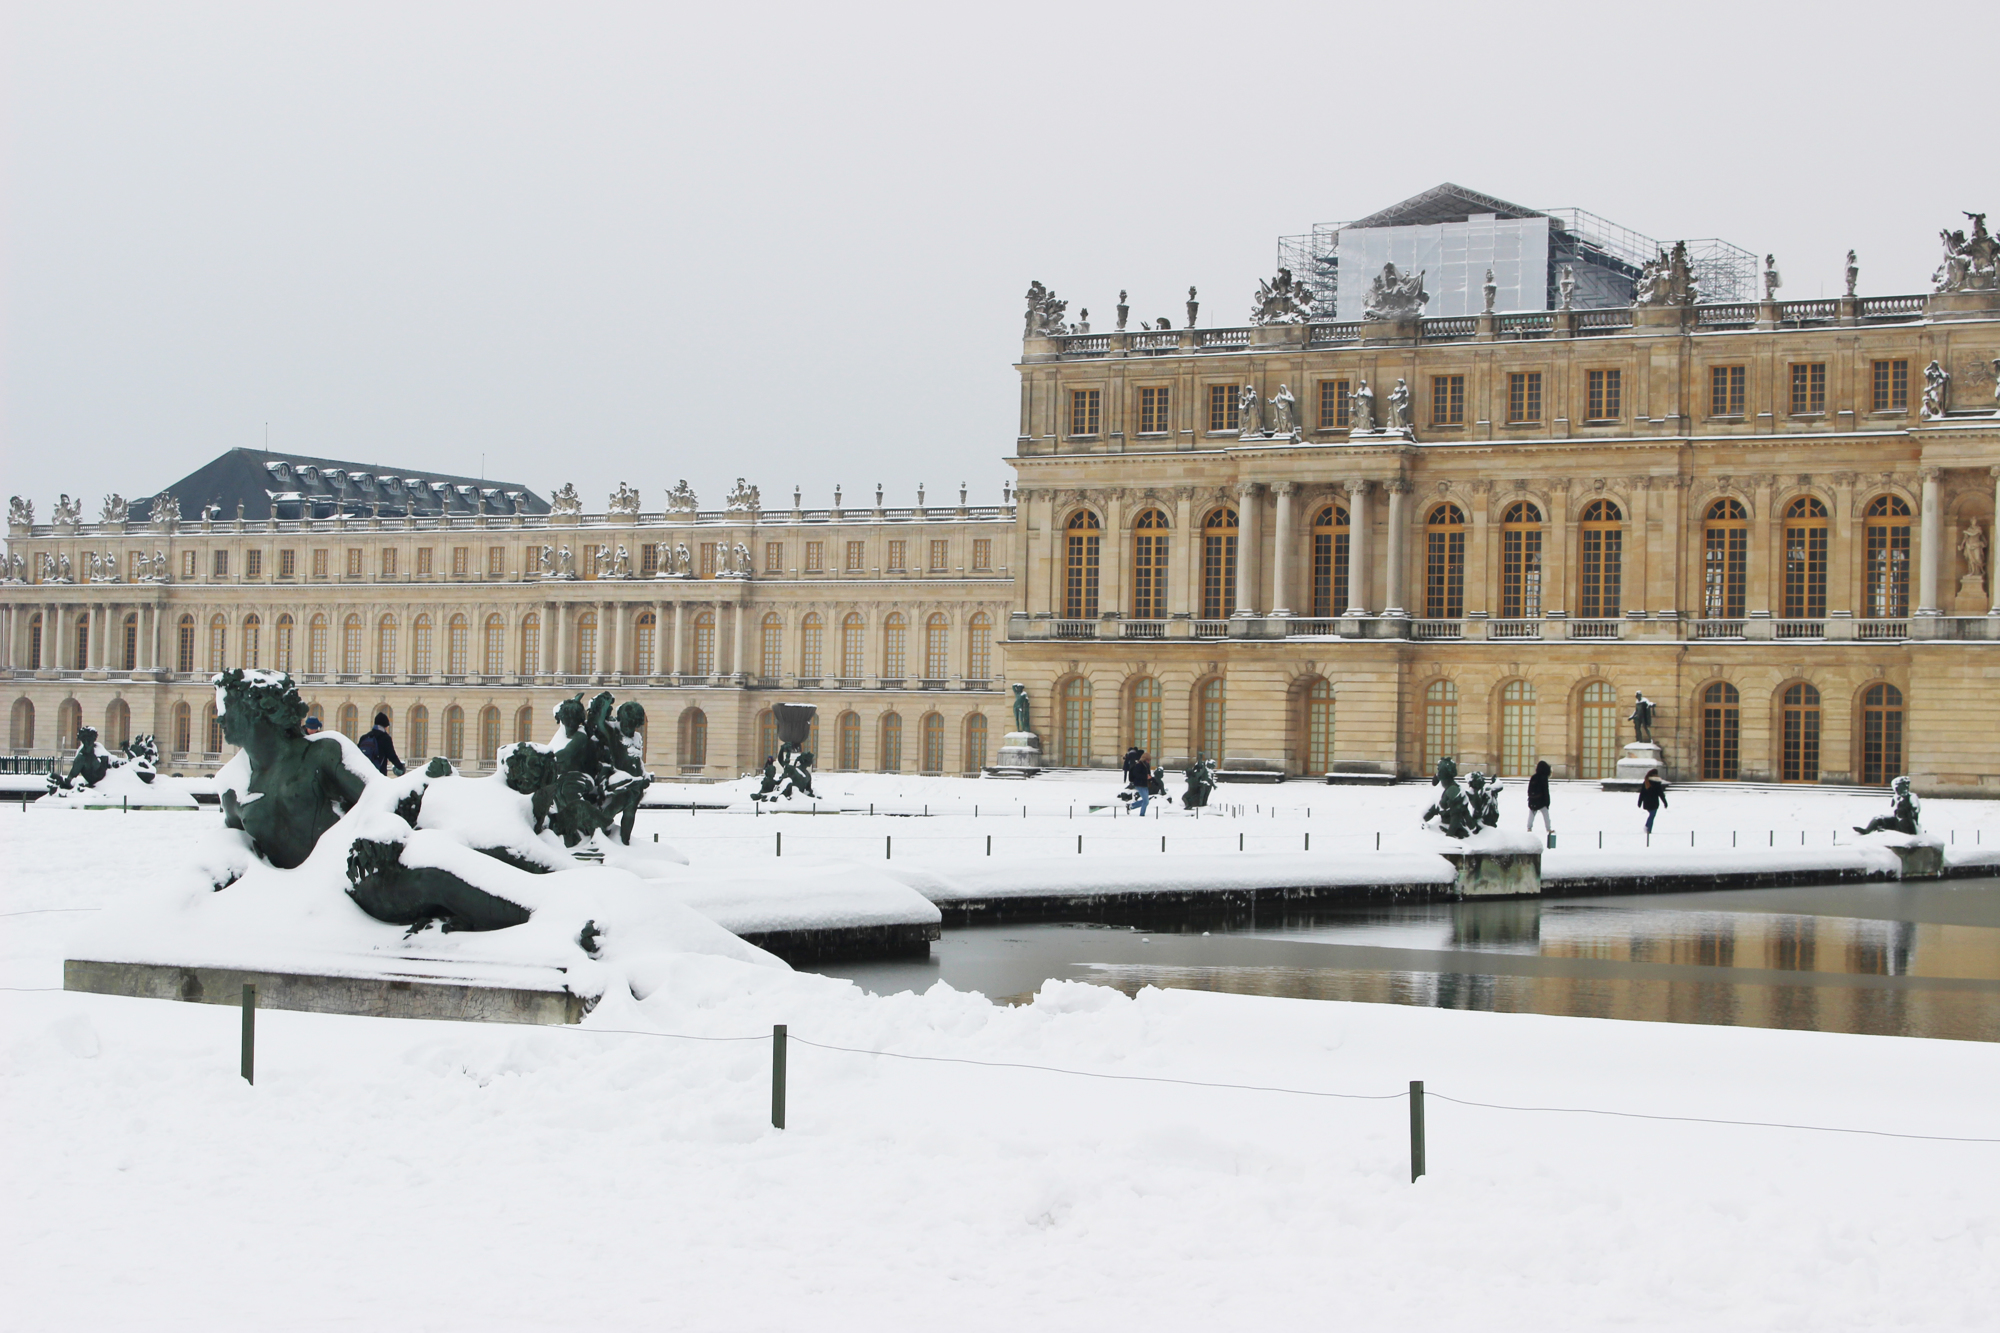 The gardens of the palace of Versailles were covered with snow on Feb. 6. Photo by Jarleene Almenas